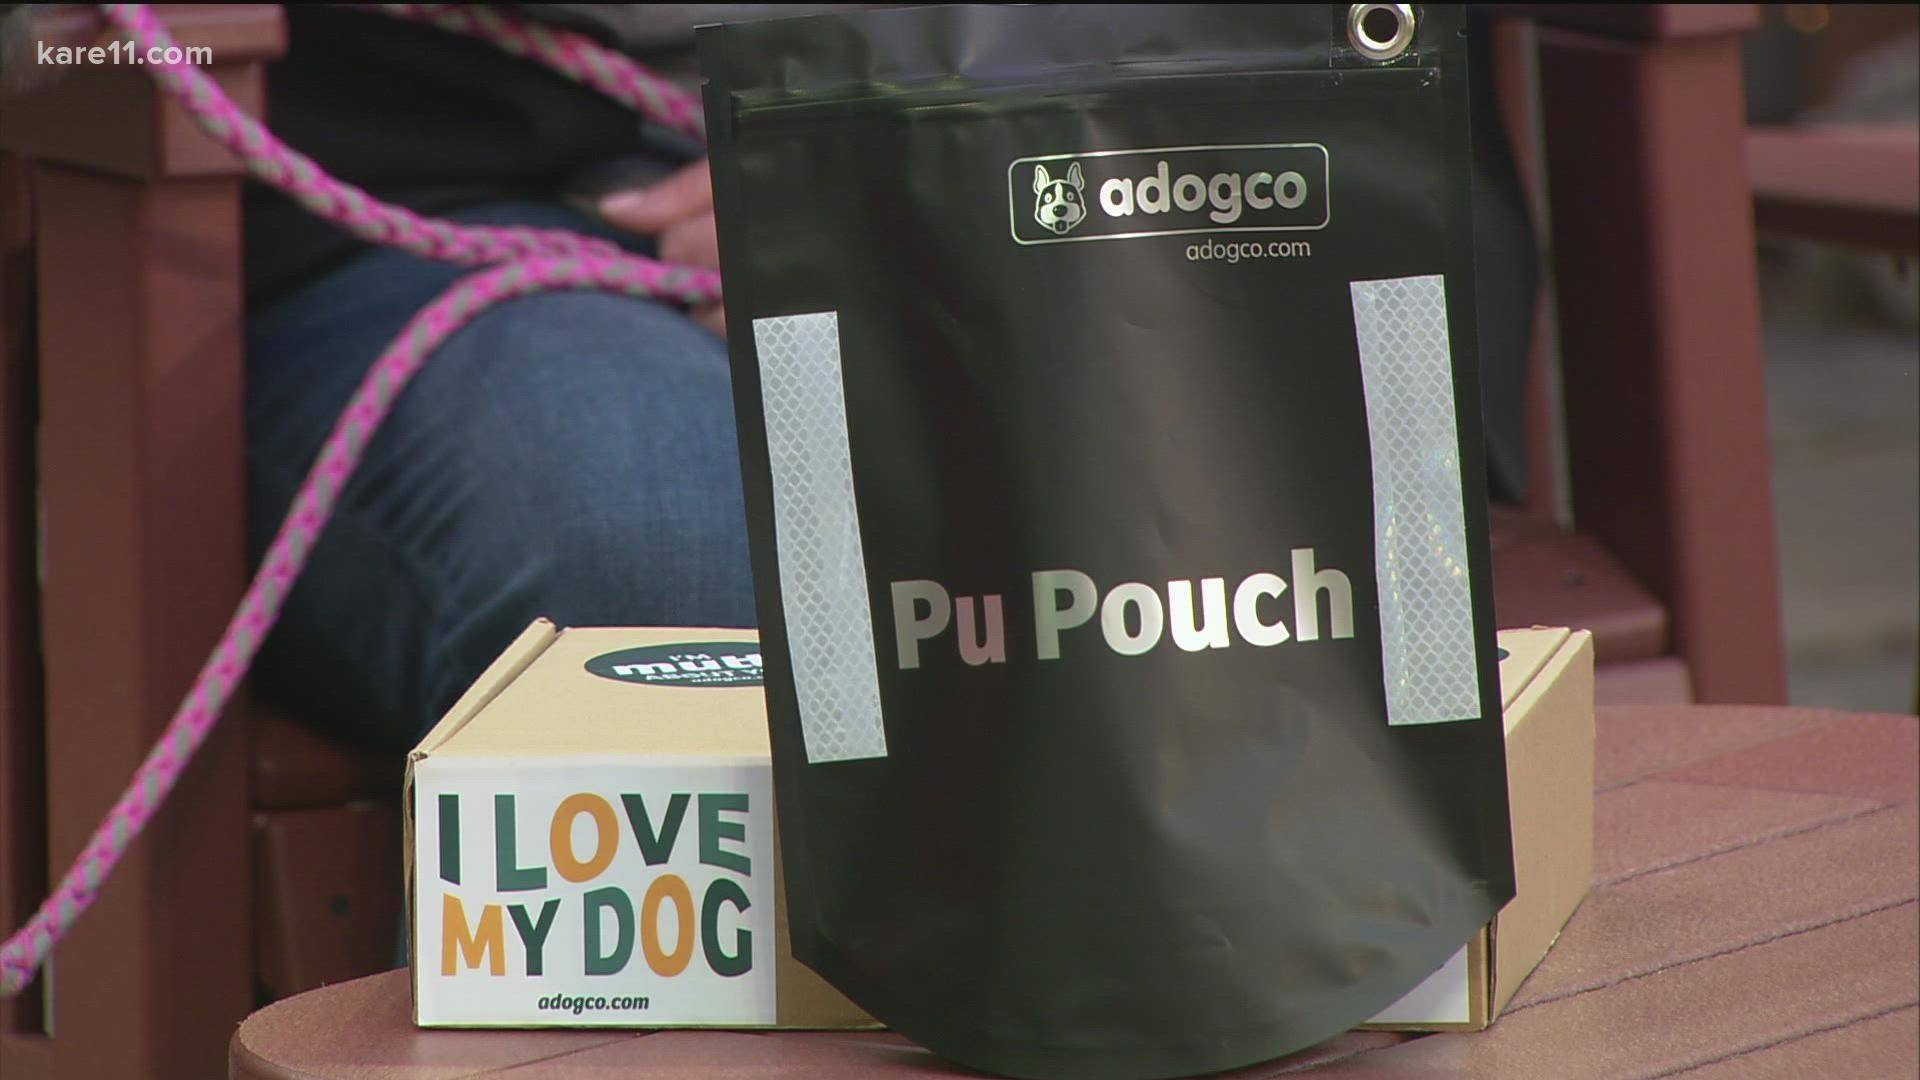 KARE 11's Karla Hult spoke to Jenn Glass, the local creator of a new product for dog owners.